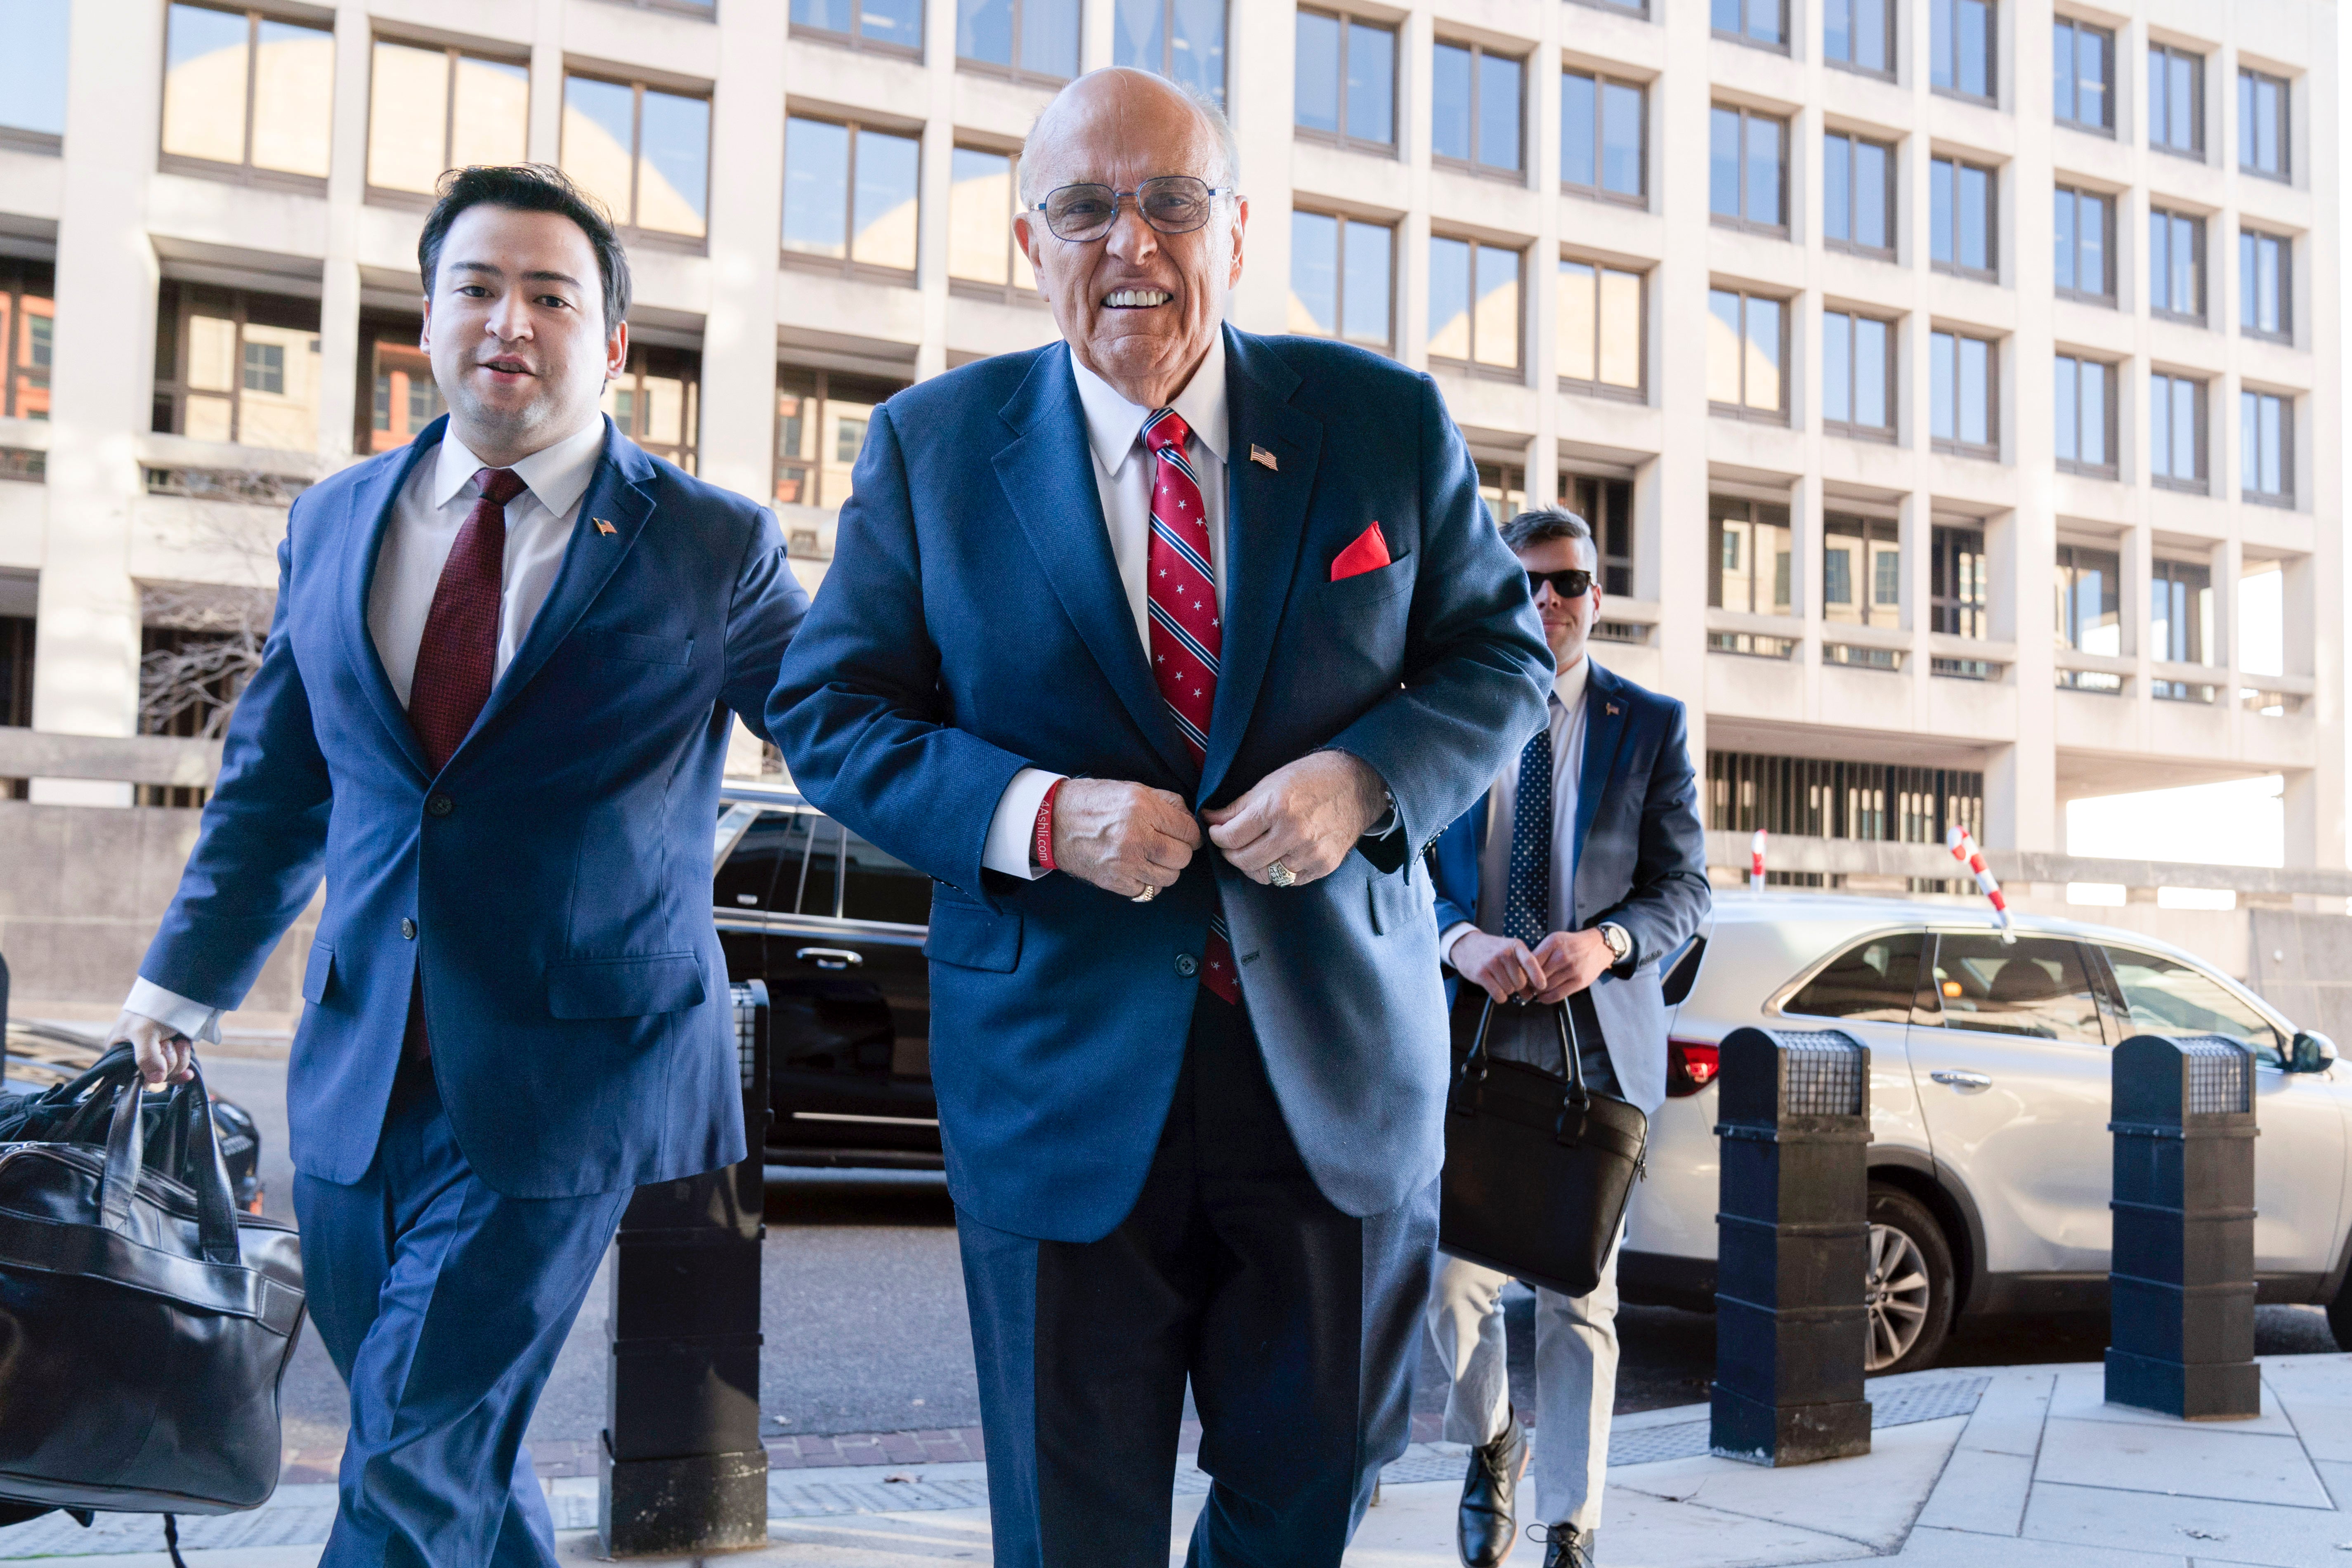 Rudy Giuliani arriving in court on 14 December